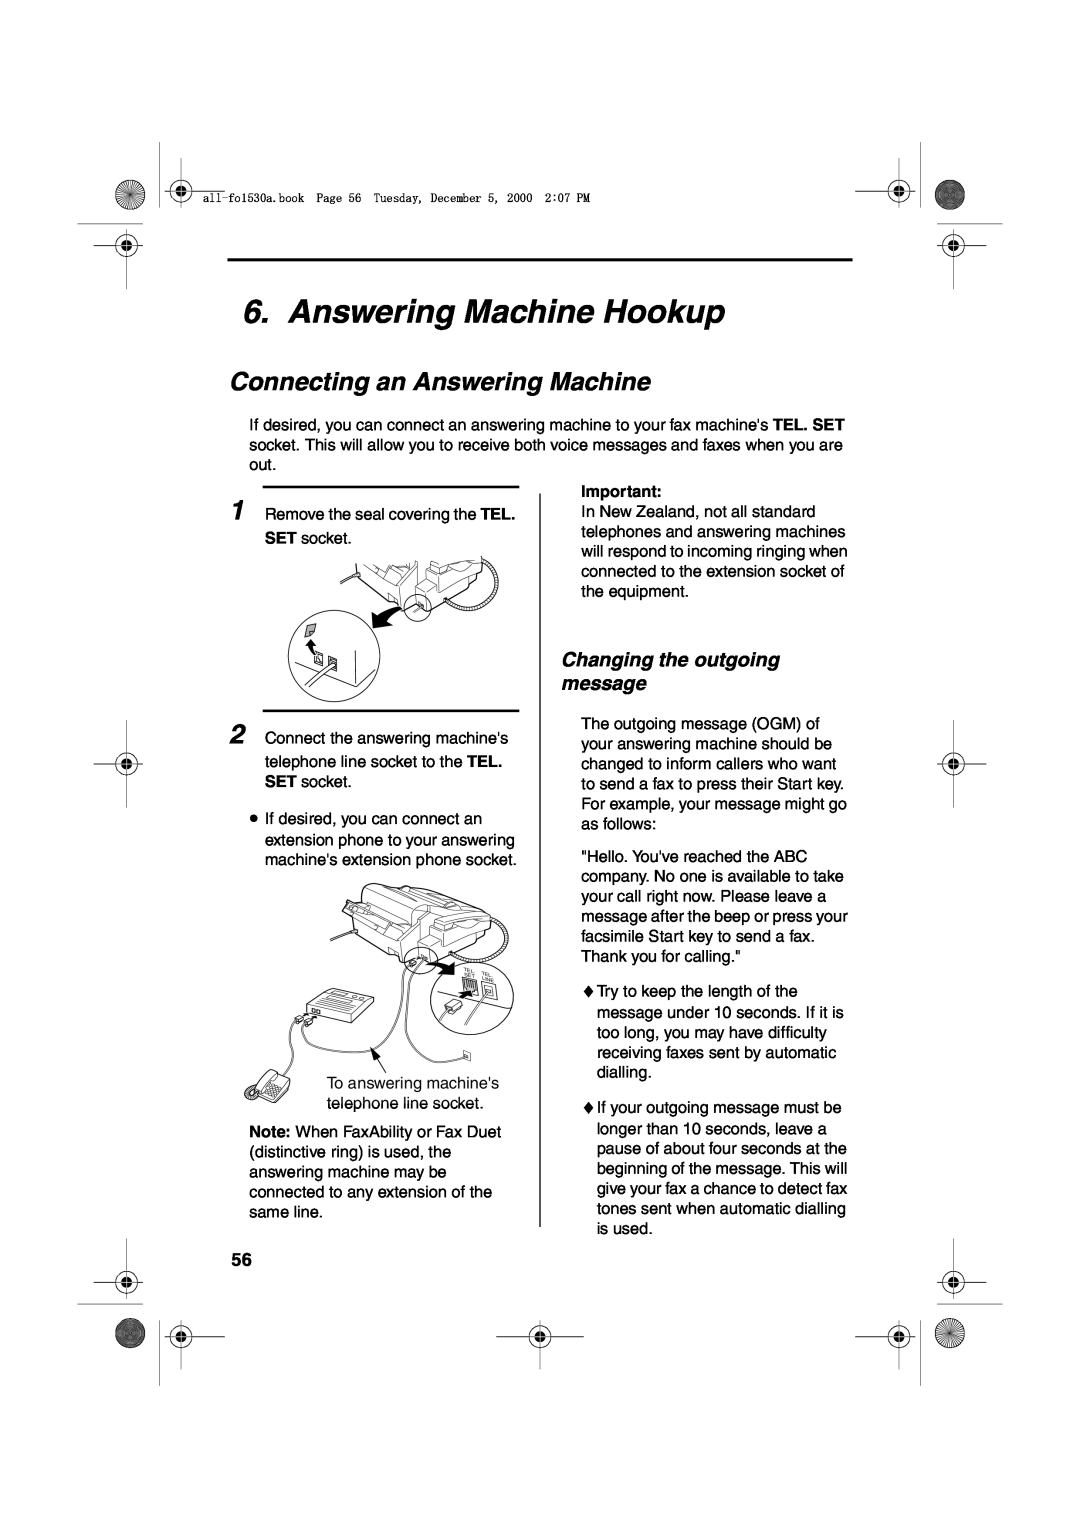 Sharp FO-1530 operation manual Answering Machine Hookup, Connecting an Answering Machine, Changing the outgoing message 